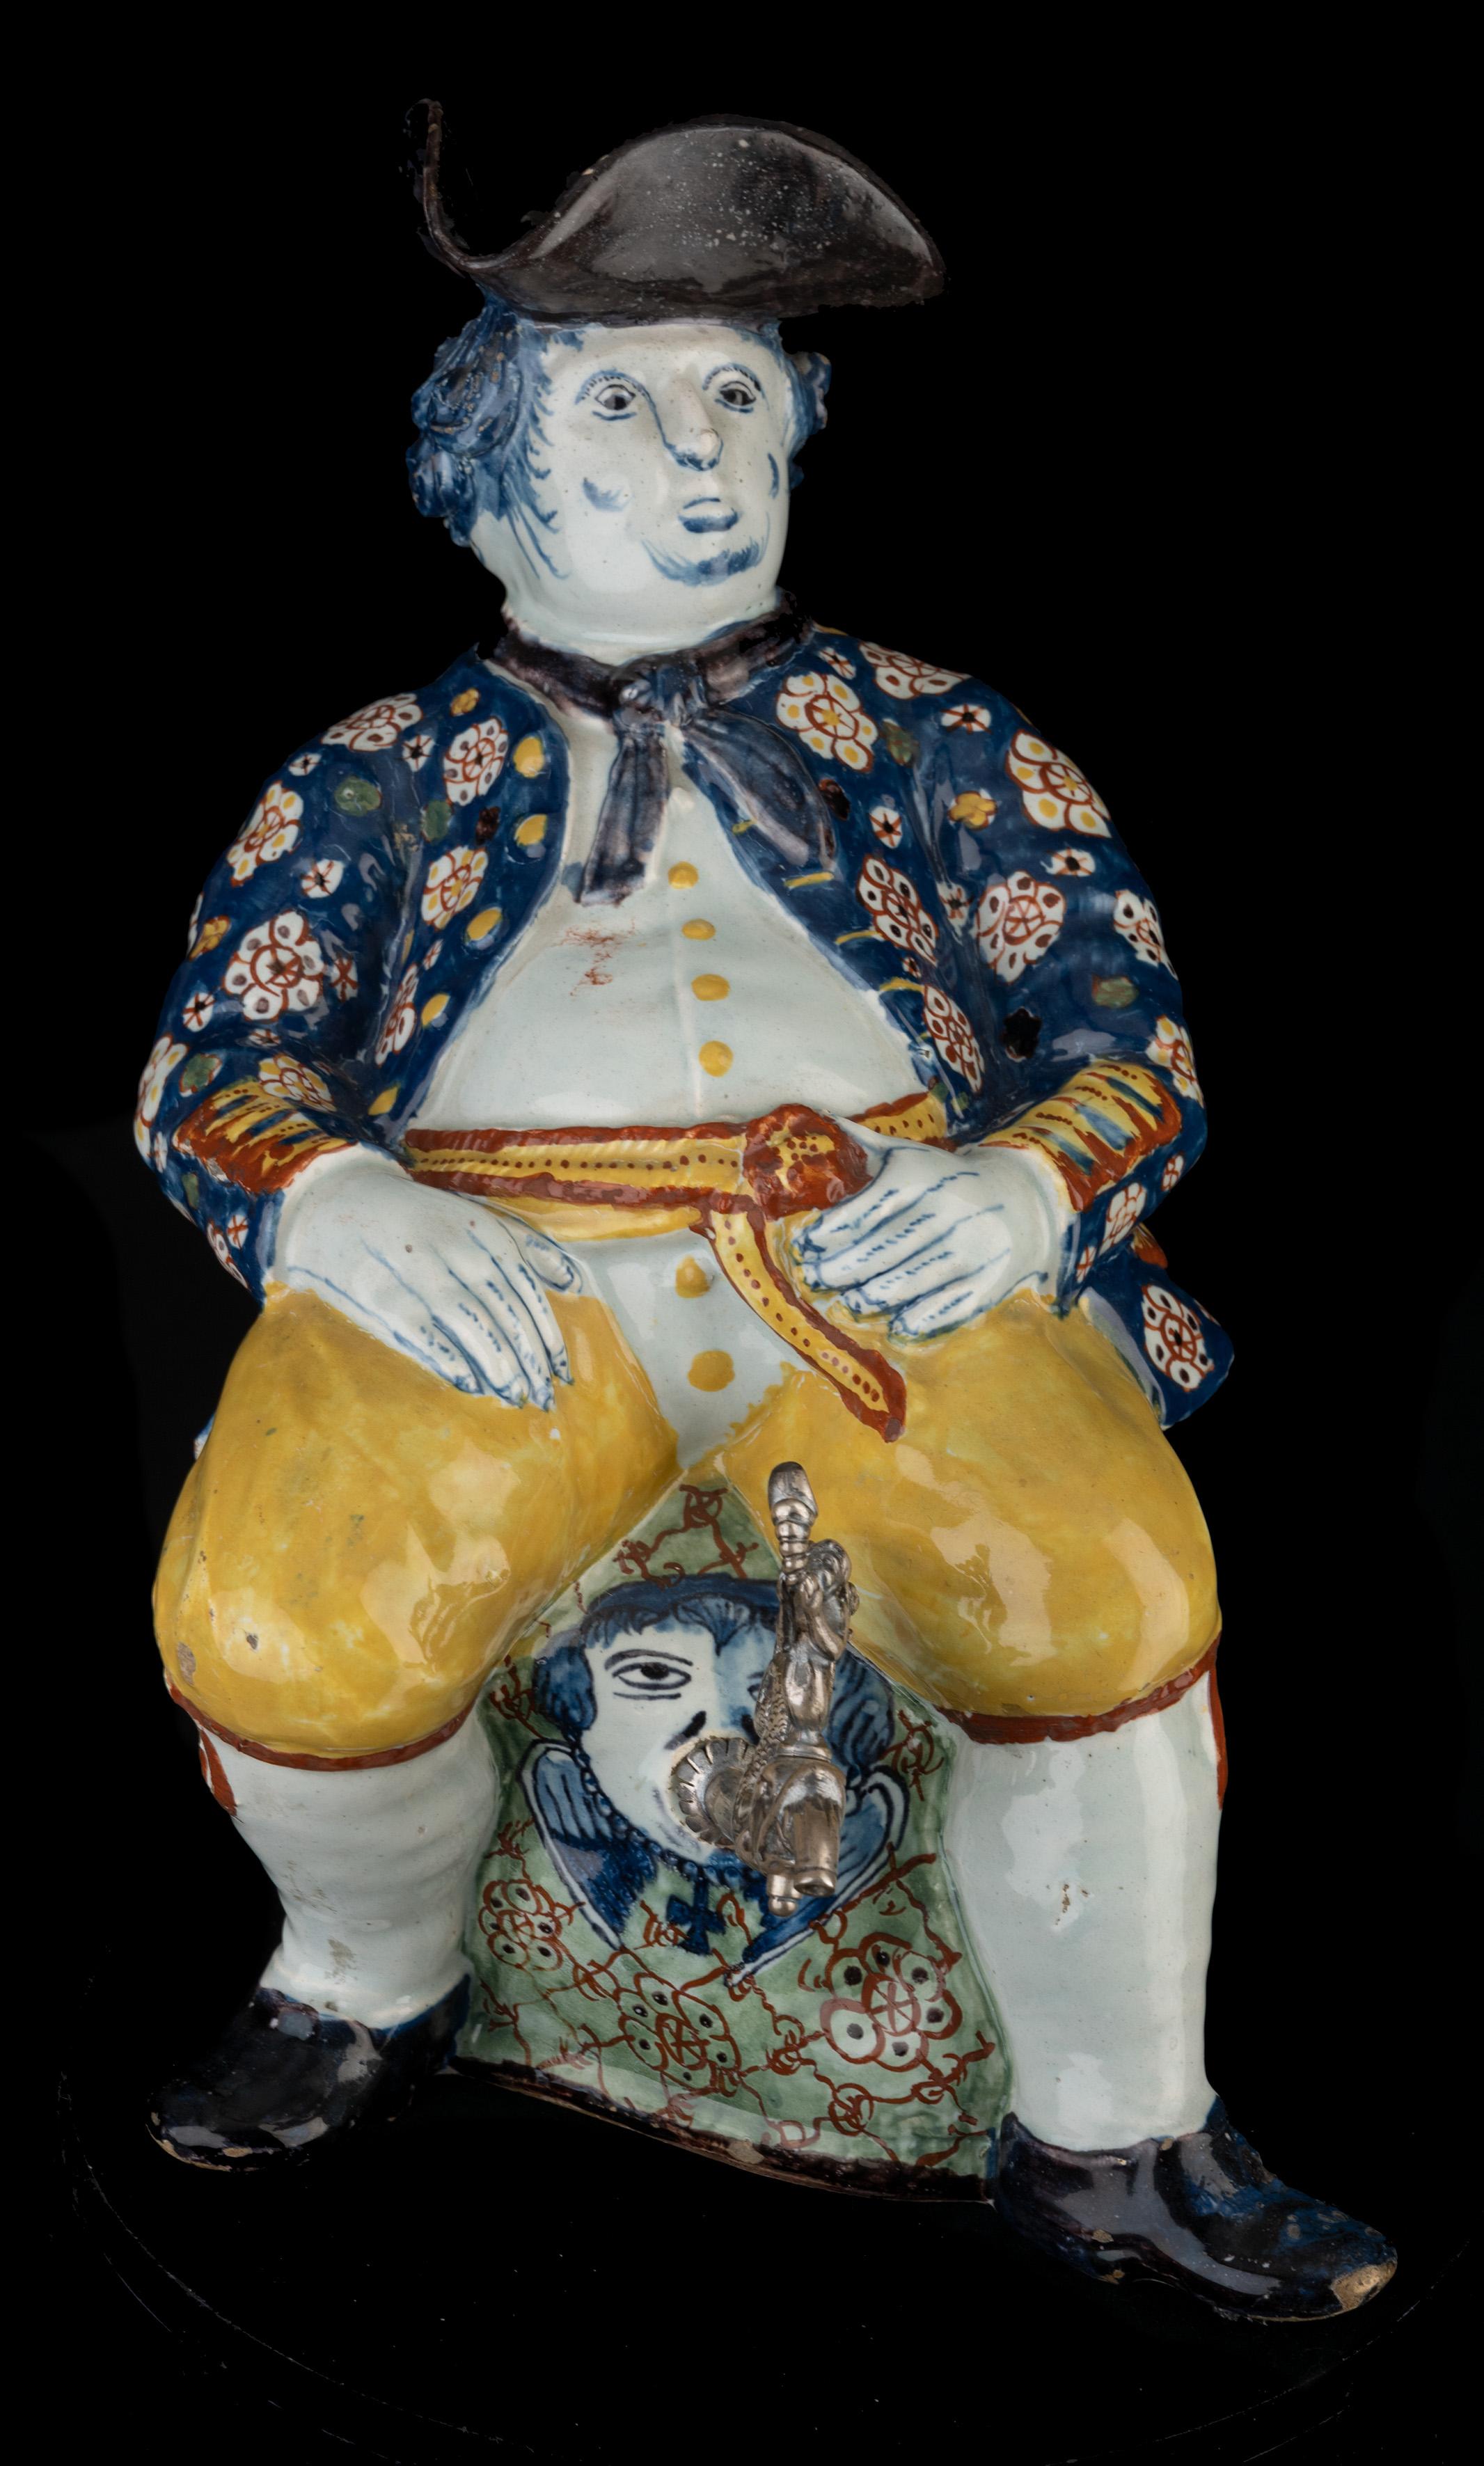 Polychrome table fountain Delft, 1750-1770

The polychrome table fountain is modelled in the form of a corpulent, seated man on a pedestal. He sits leisurely leaning back on a green pedestal with net decor with flowers. He is dressed in a blue